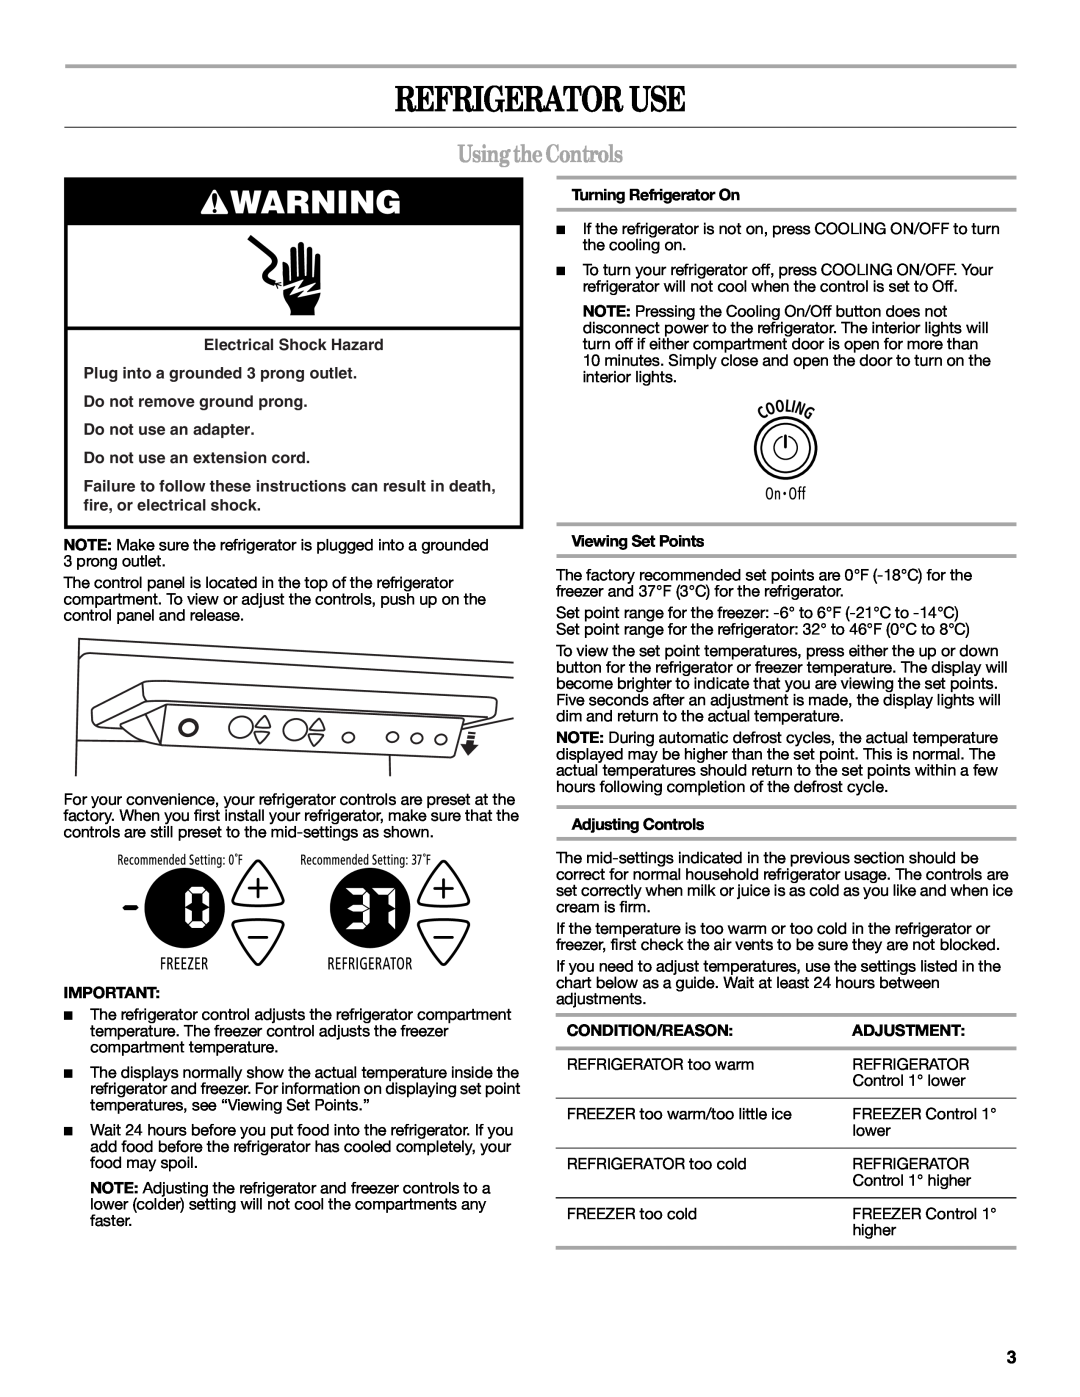 Whirlpool REFRIGERATOR USE & CARE GUIDE Refrigerator Use, UsingtheControls, Do not use an extension cord, Condition/Reason 